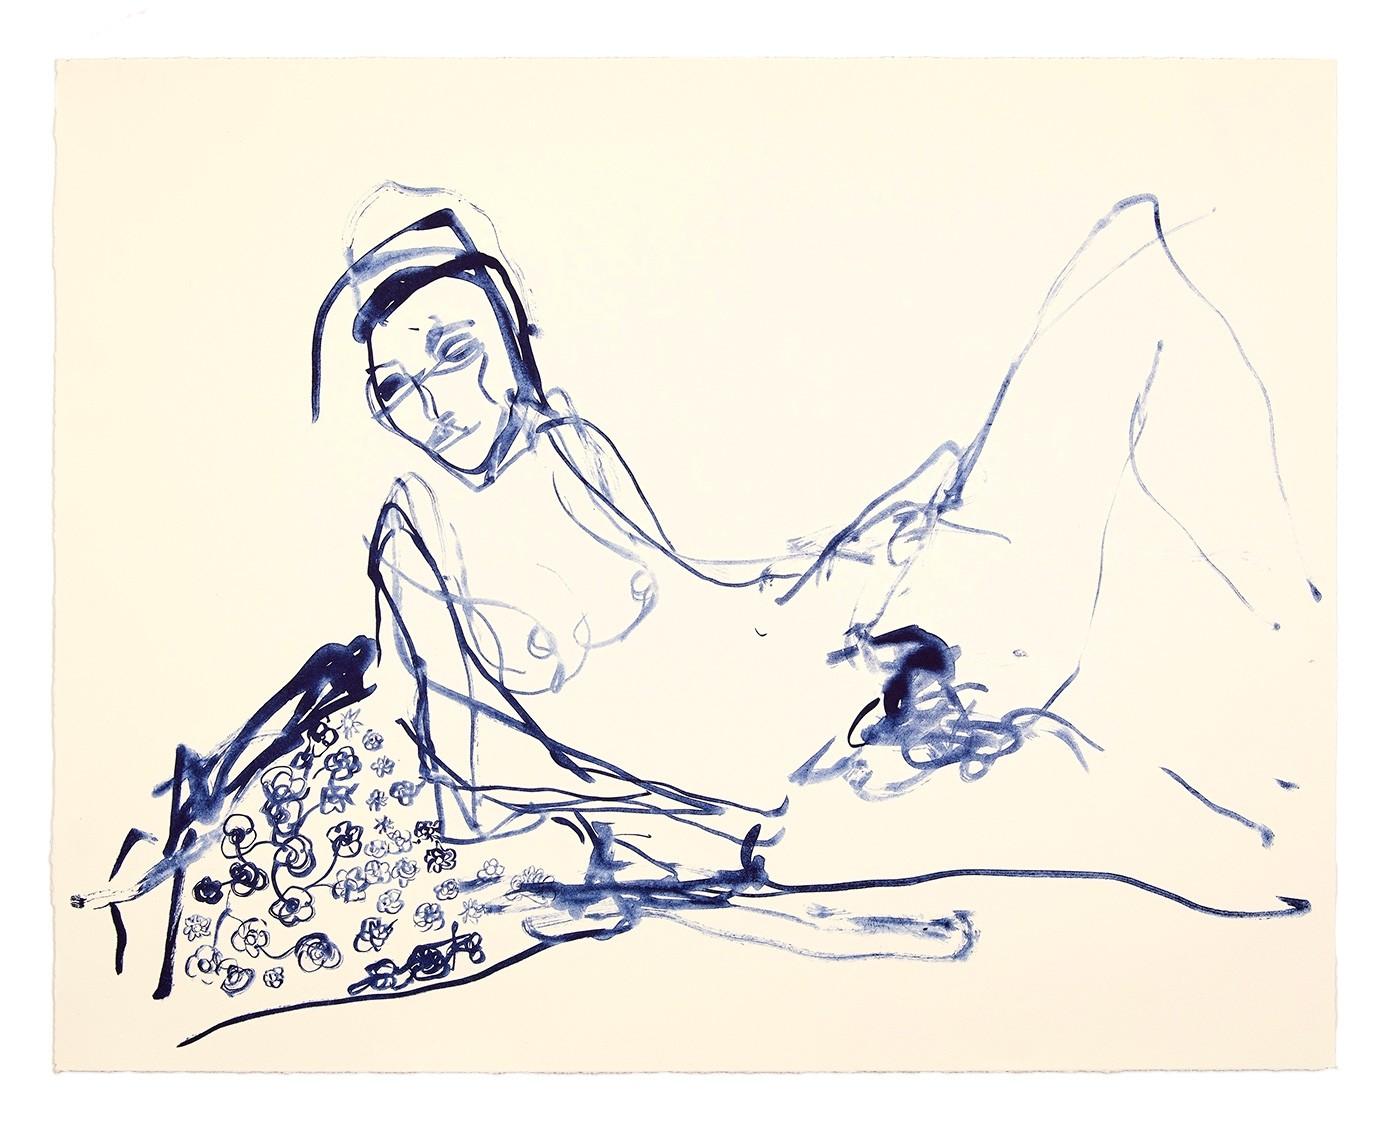 What type of artist is Tracey Emin?